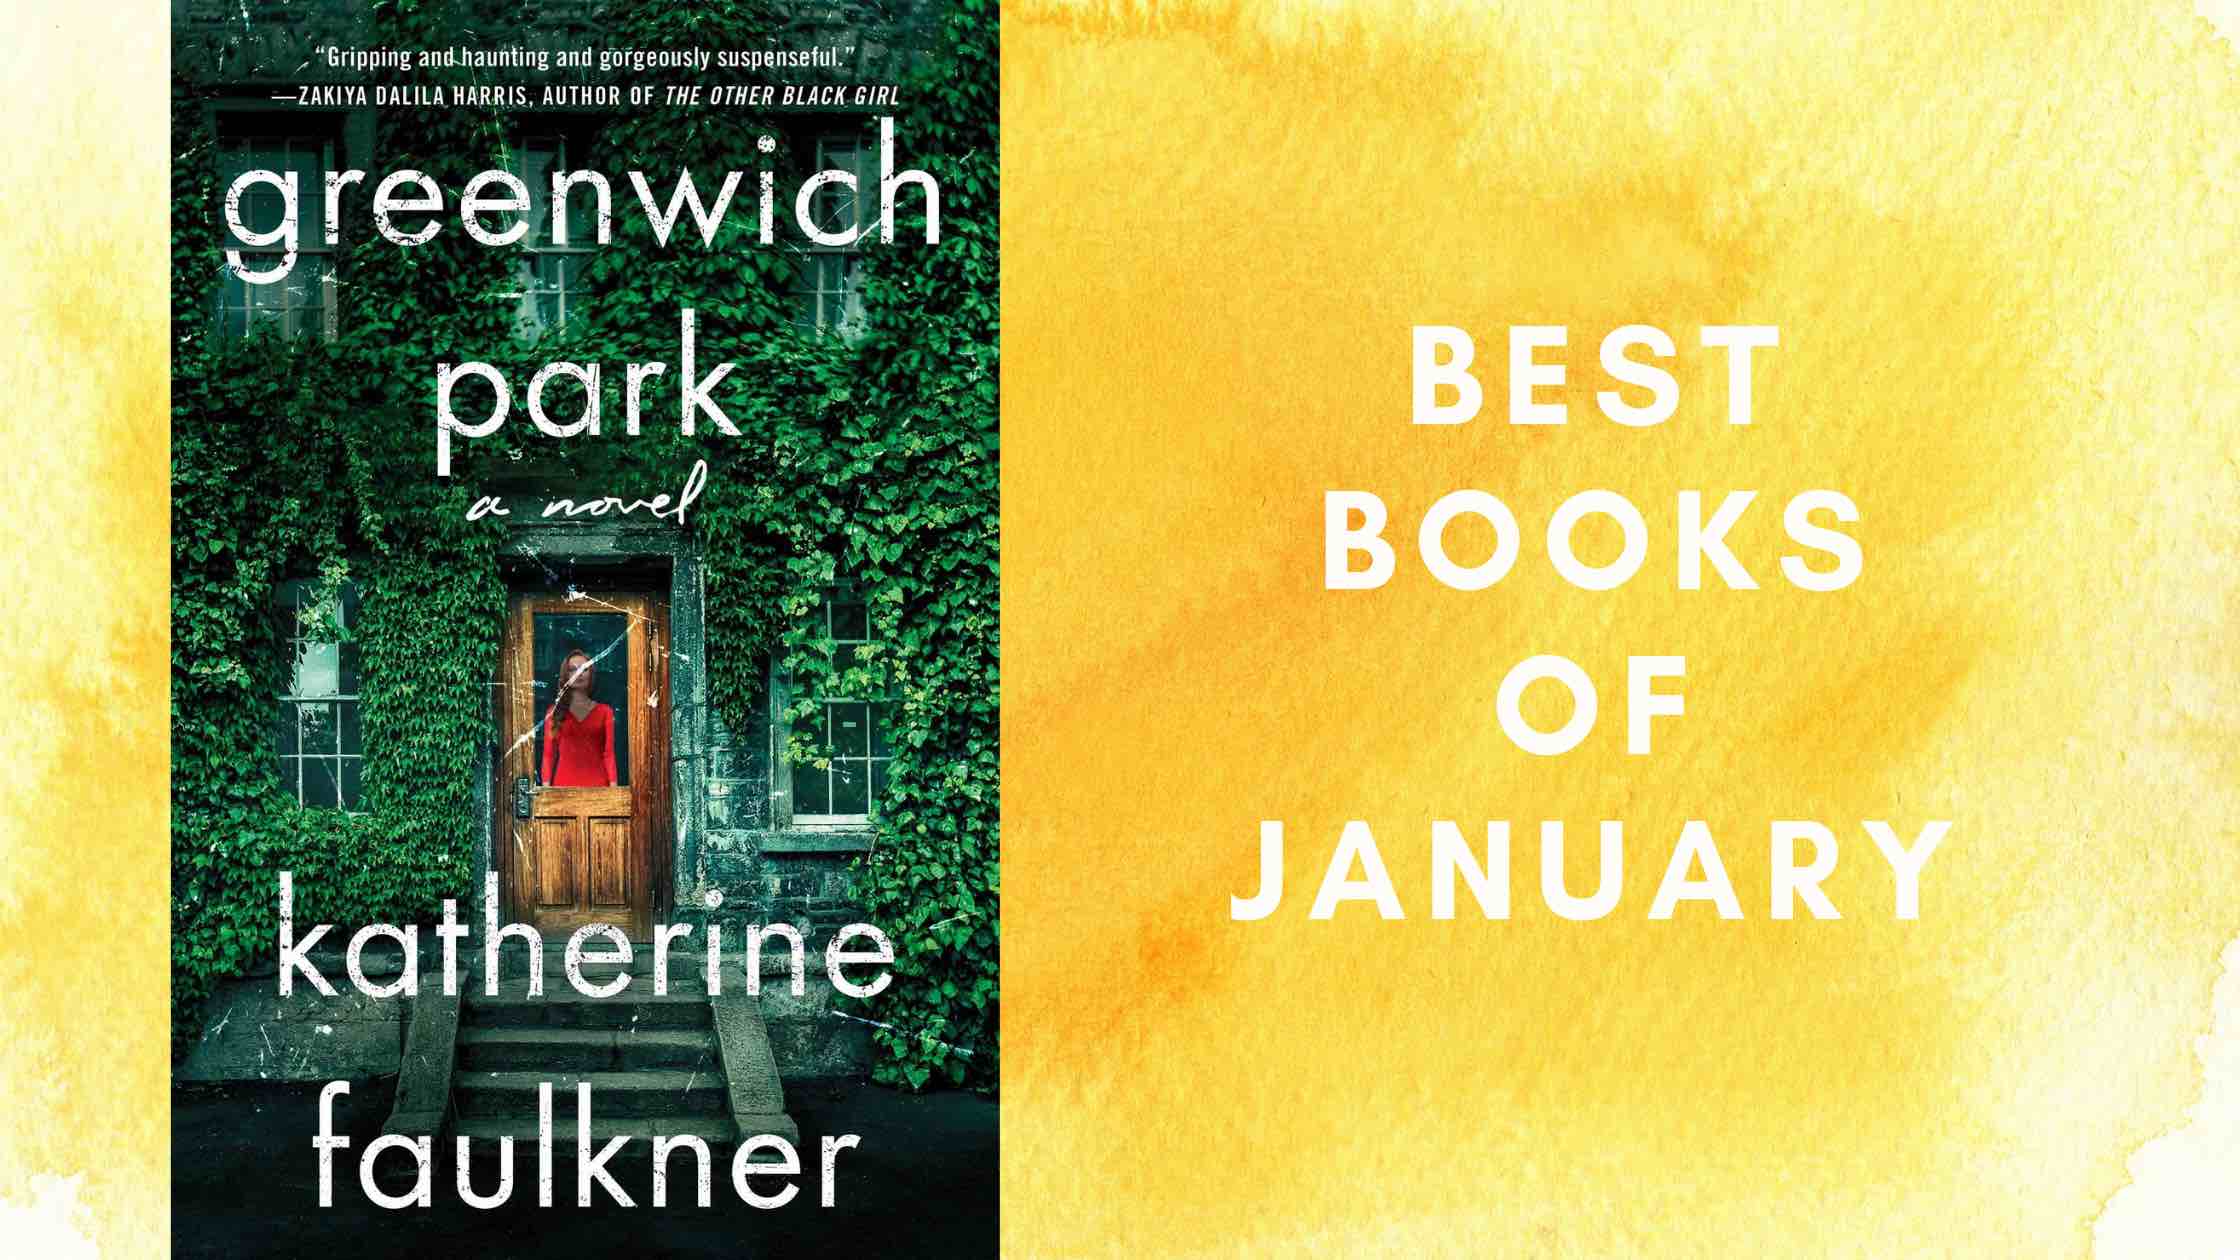 One of the best books of January is Greenwich Park.